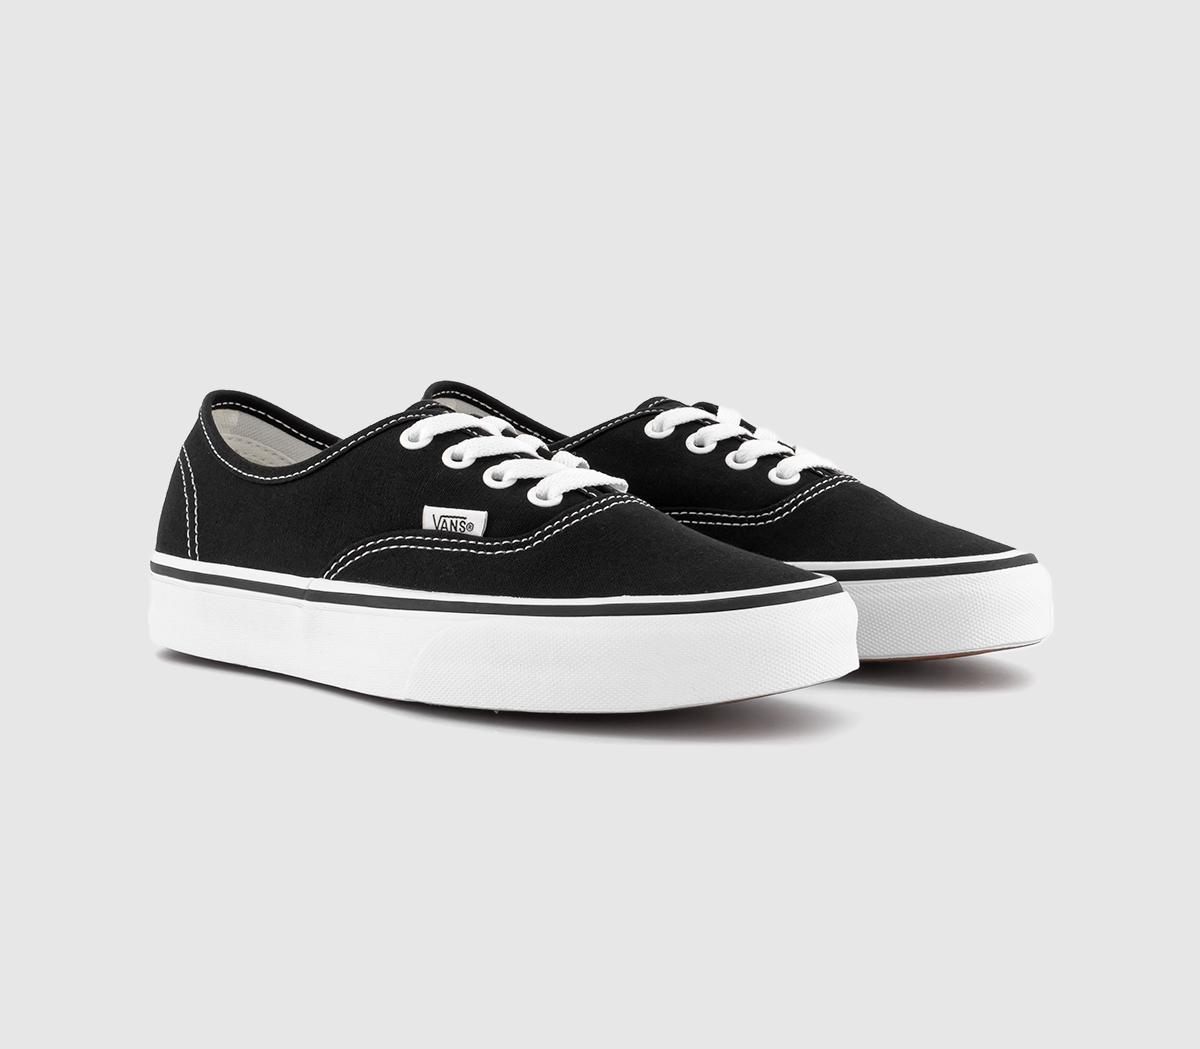 Vans Authentic Trainers In Black And White, 5